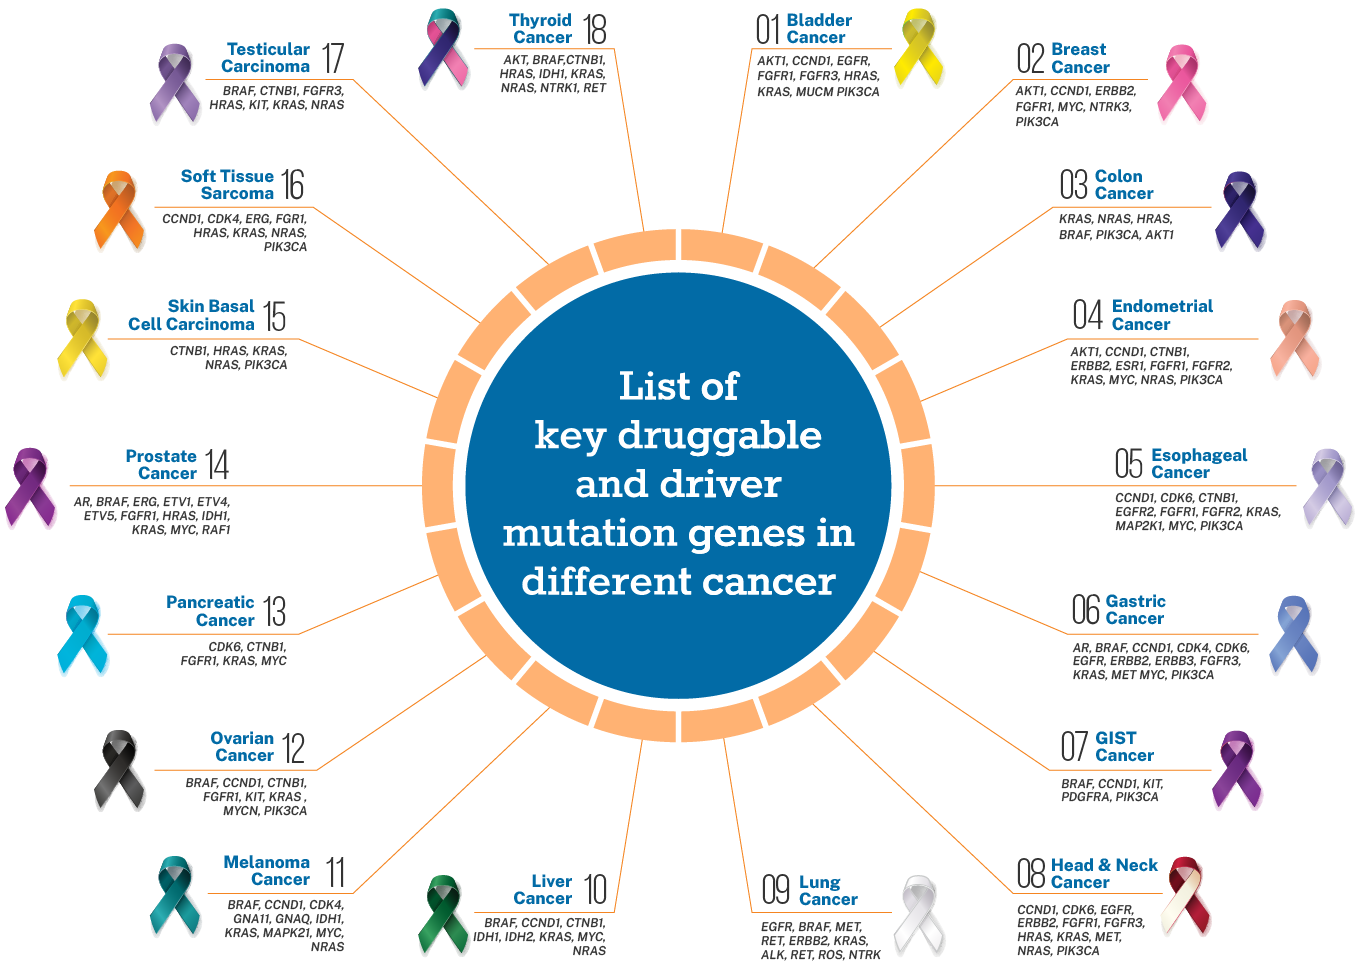 The image shows the list of genes in different cancer.